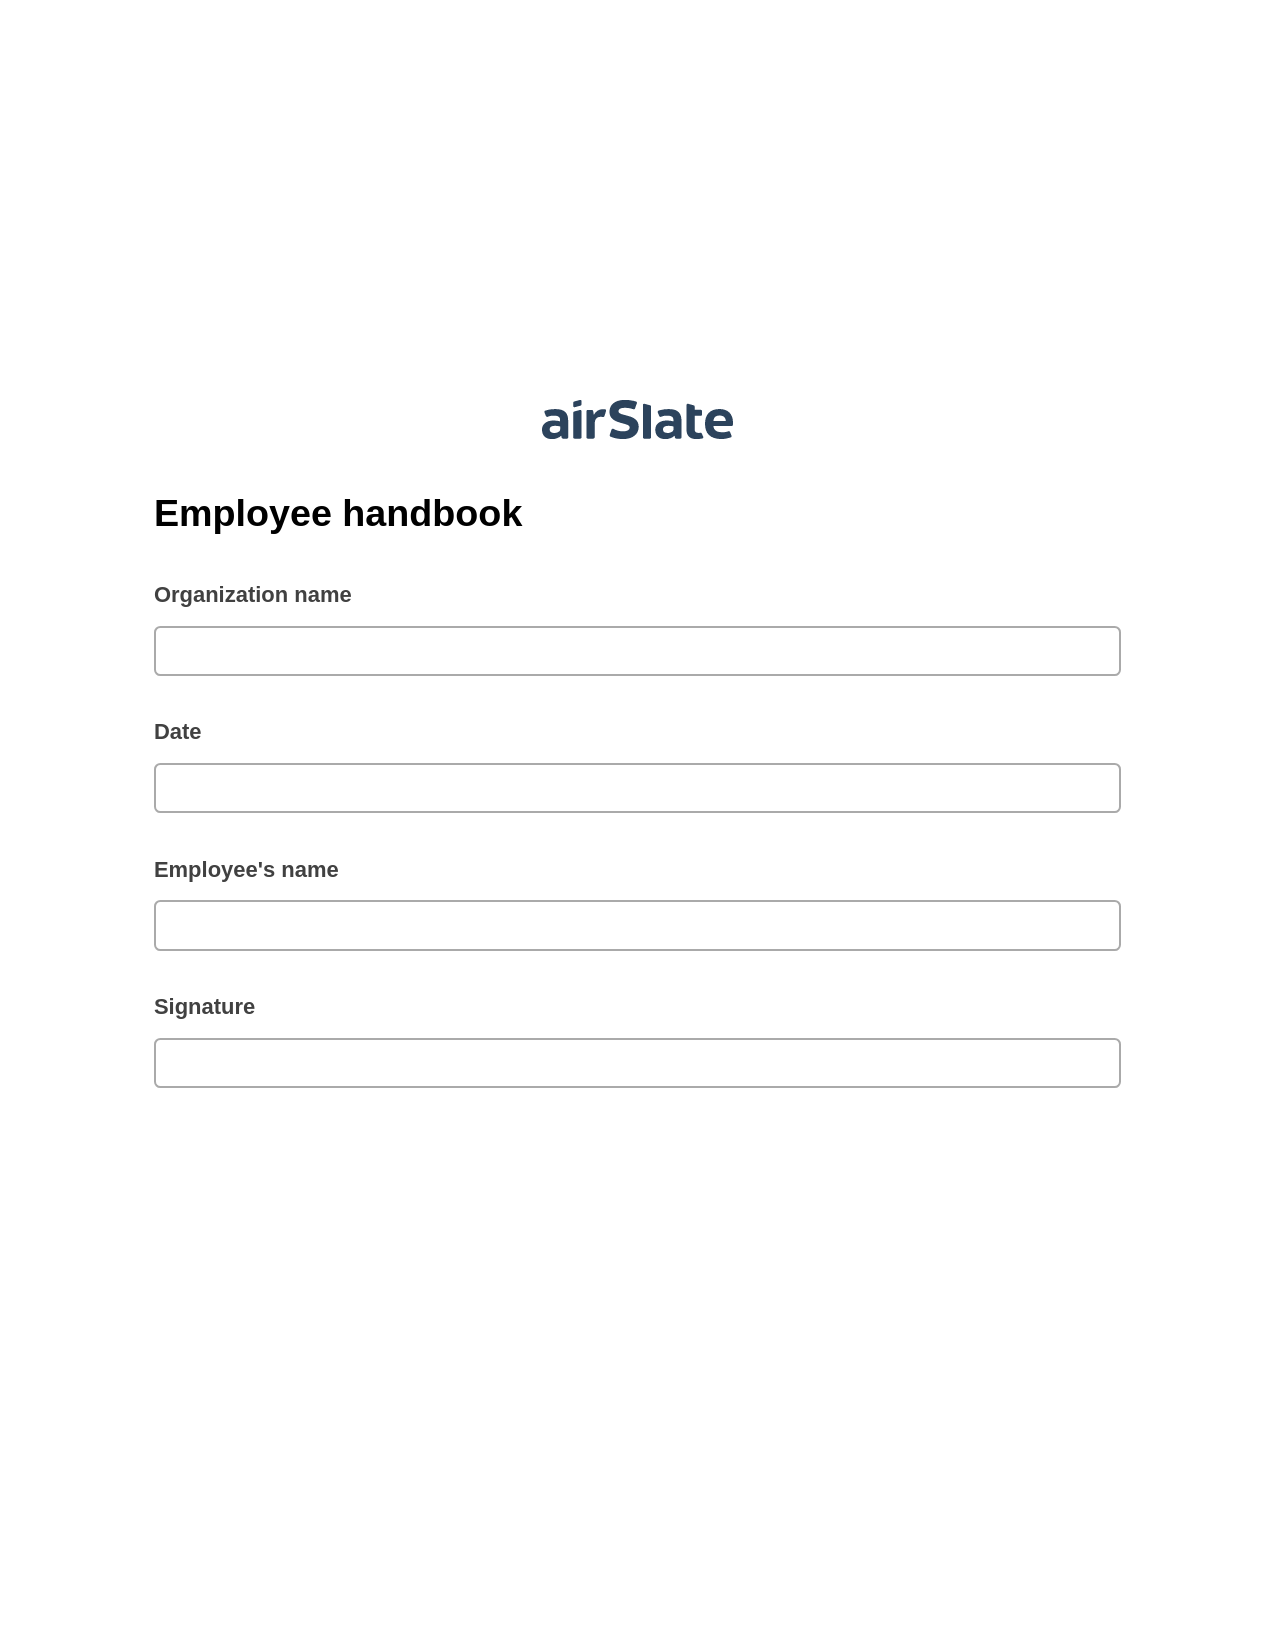 Employee handbook Pre-fill from another Slate Bot, Roles Reminder Bot, Export to MySQL Bot